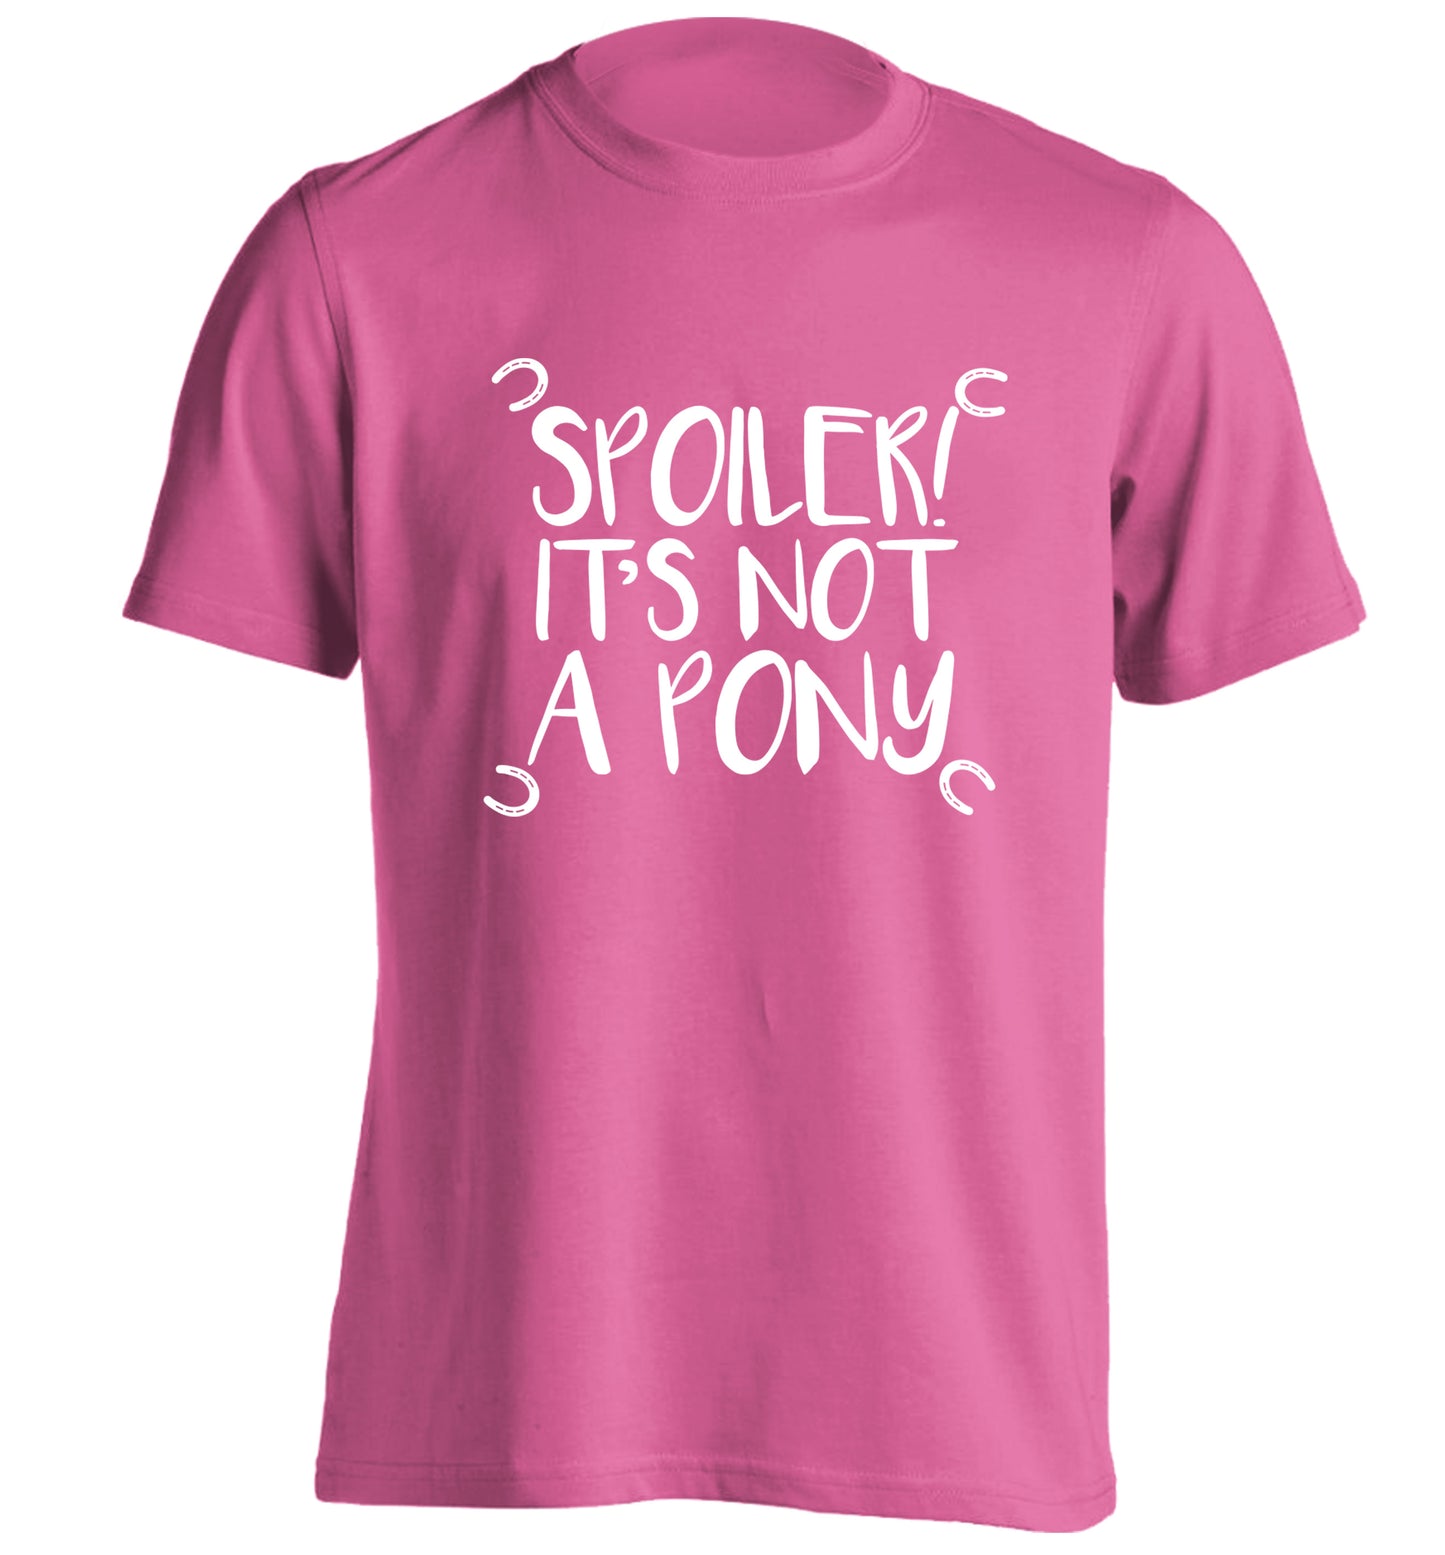 Spoiler it's not a pony adults unisex pink Tshirt 2XL